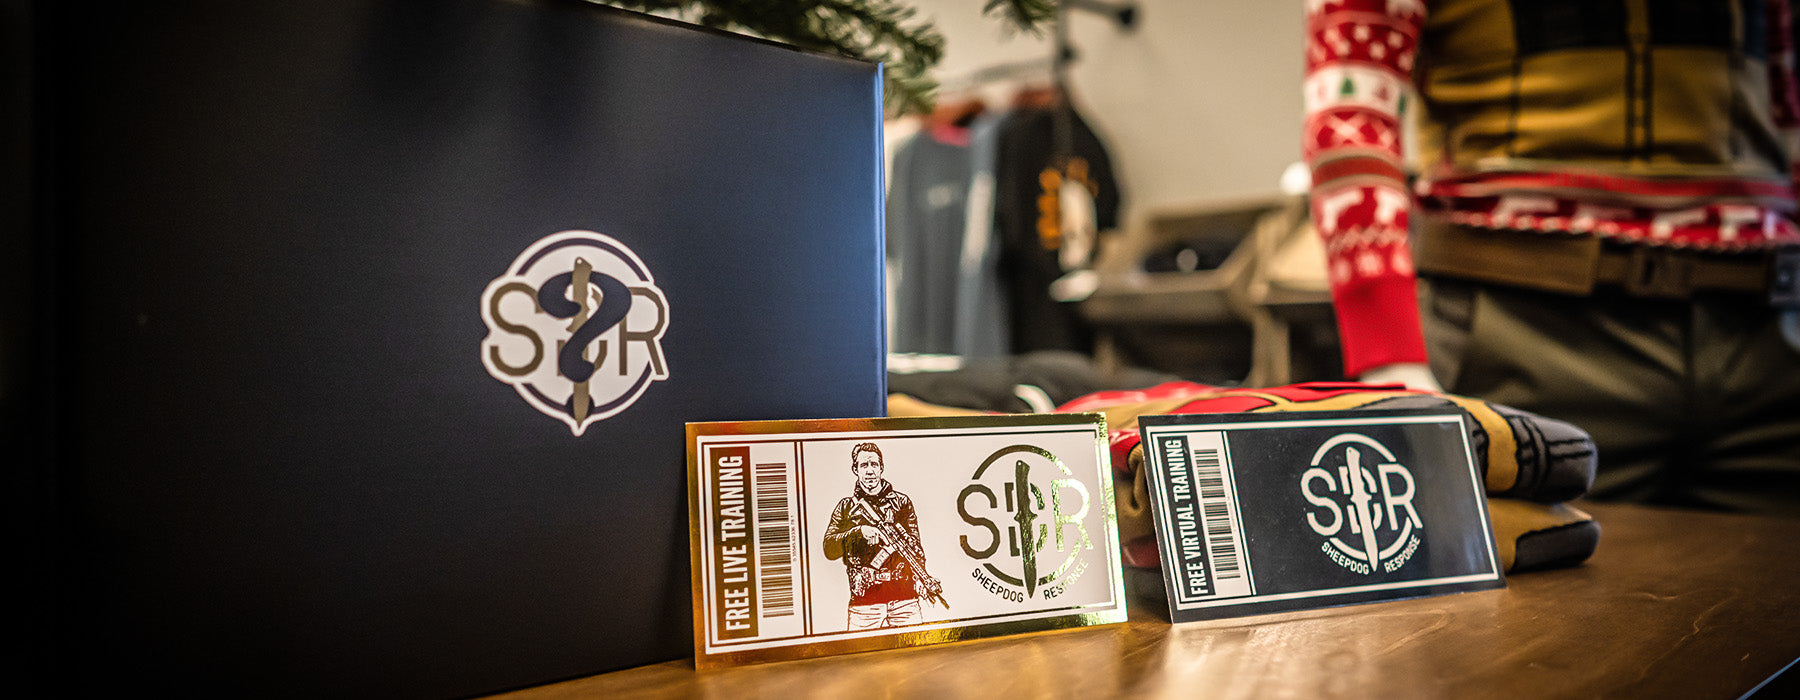 Holiday Mystery Boxes are here, with a chance to win a Gold or Silver Ticket to unlock even more excitement.